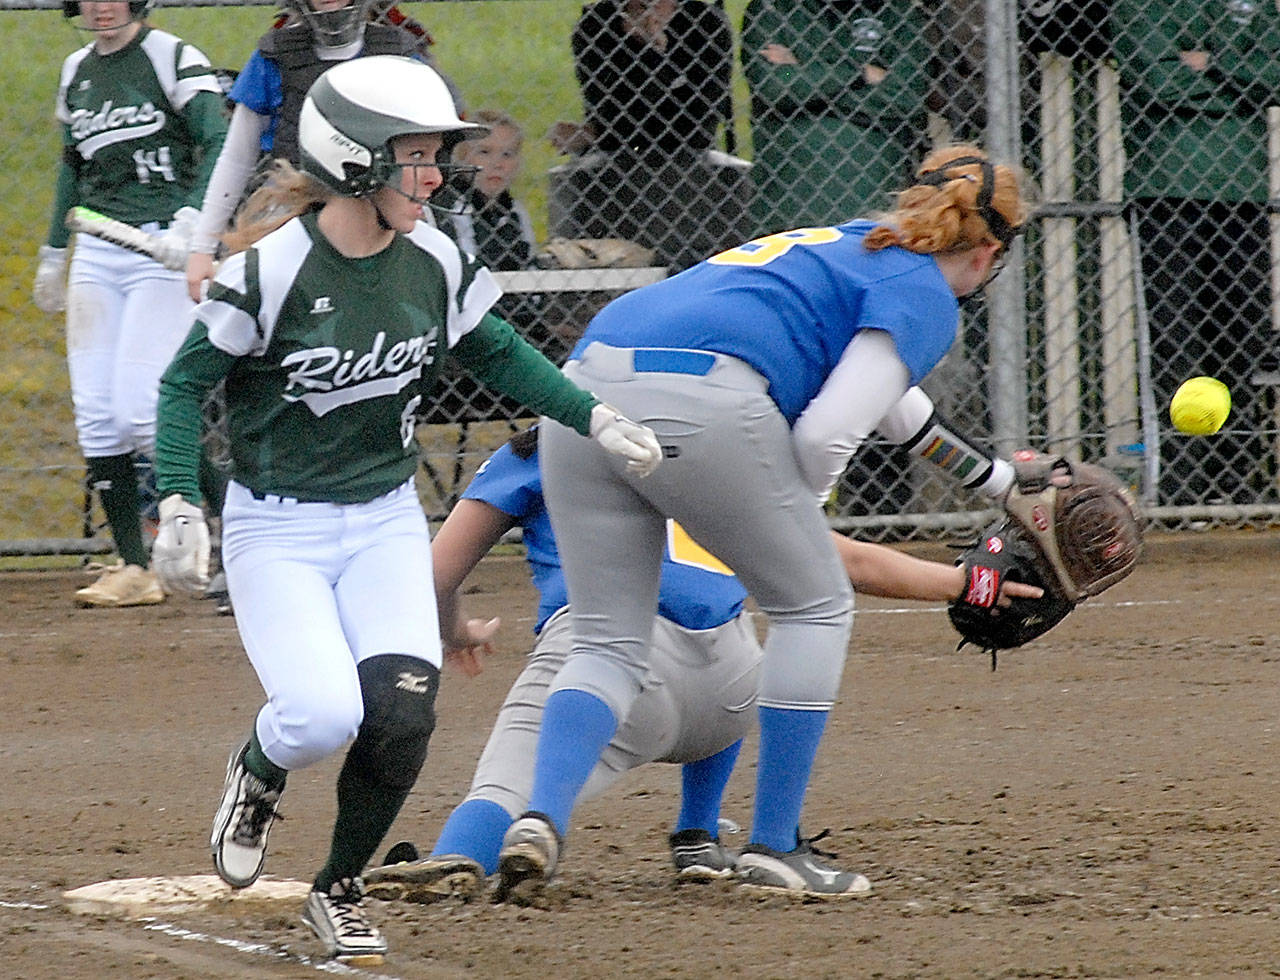 Keith Thorpe/Peninsula Daily News                                Port Angeles’ Sierra Robinson beats the throw to Bremerton first baseman Cyrah Bias backed by second baseman Lissa Joiner, right, in the first inning of the Roughriders’ 12-0 shutout of the Knights.